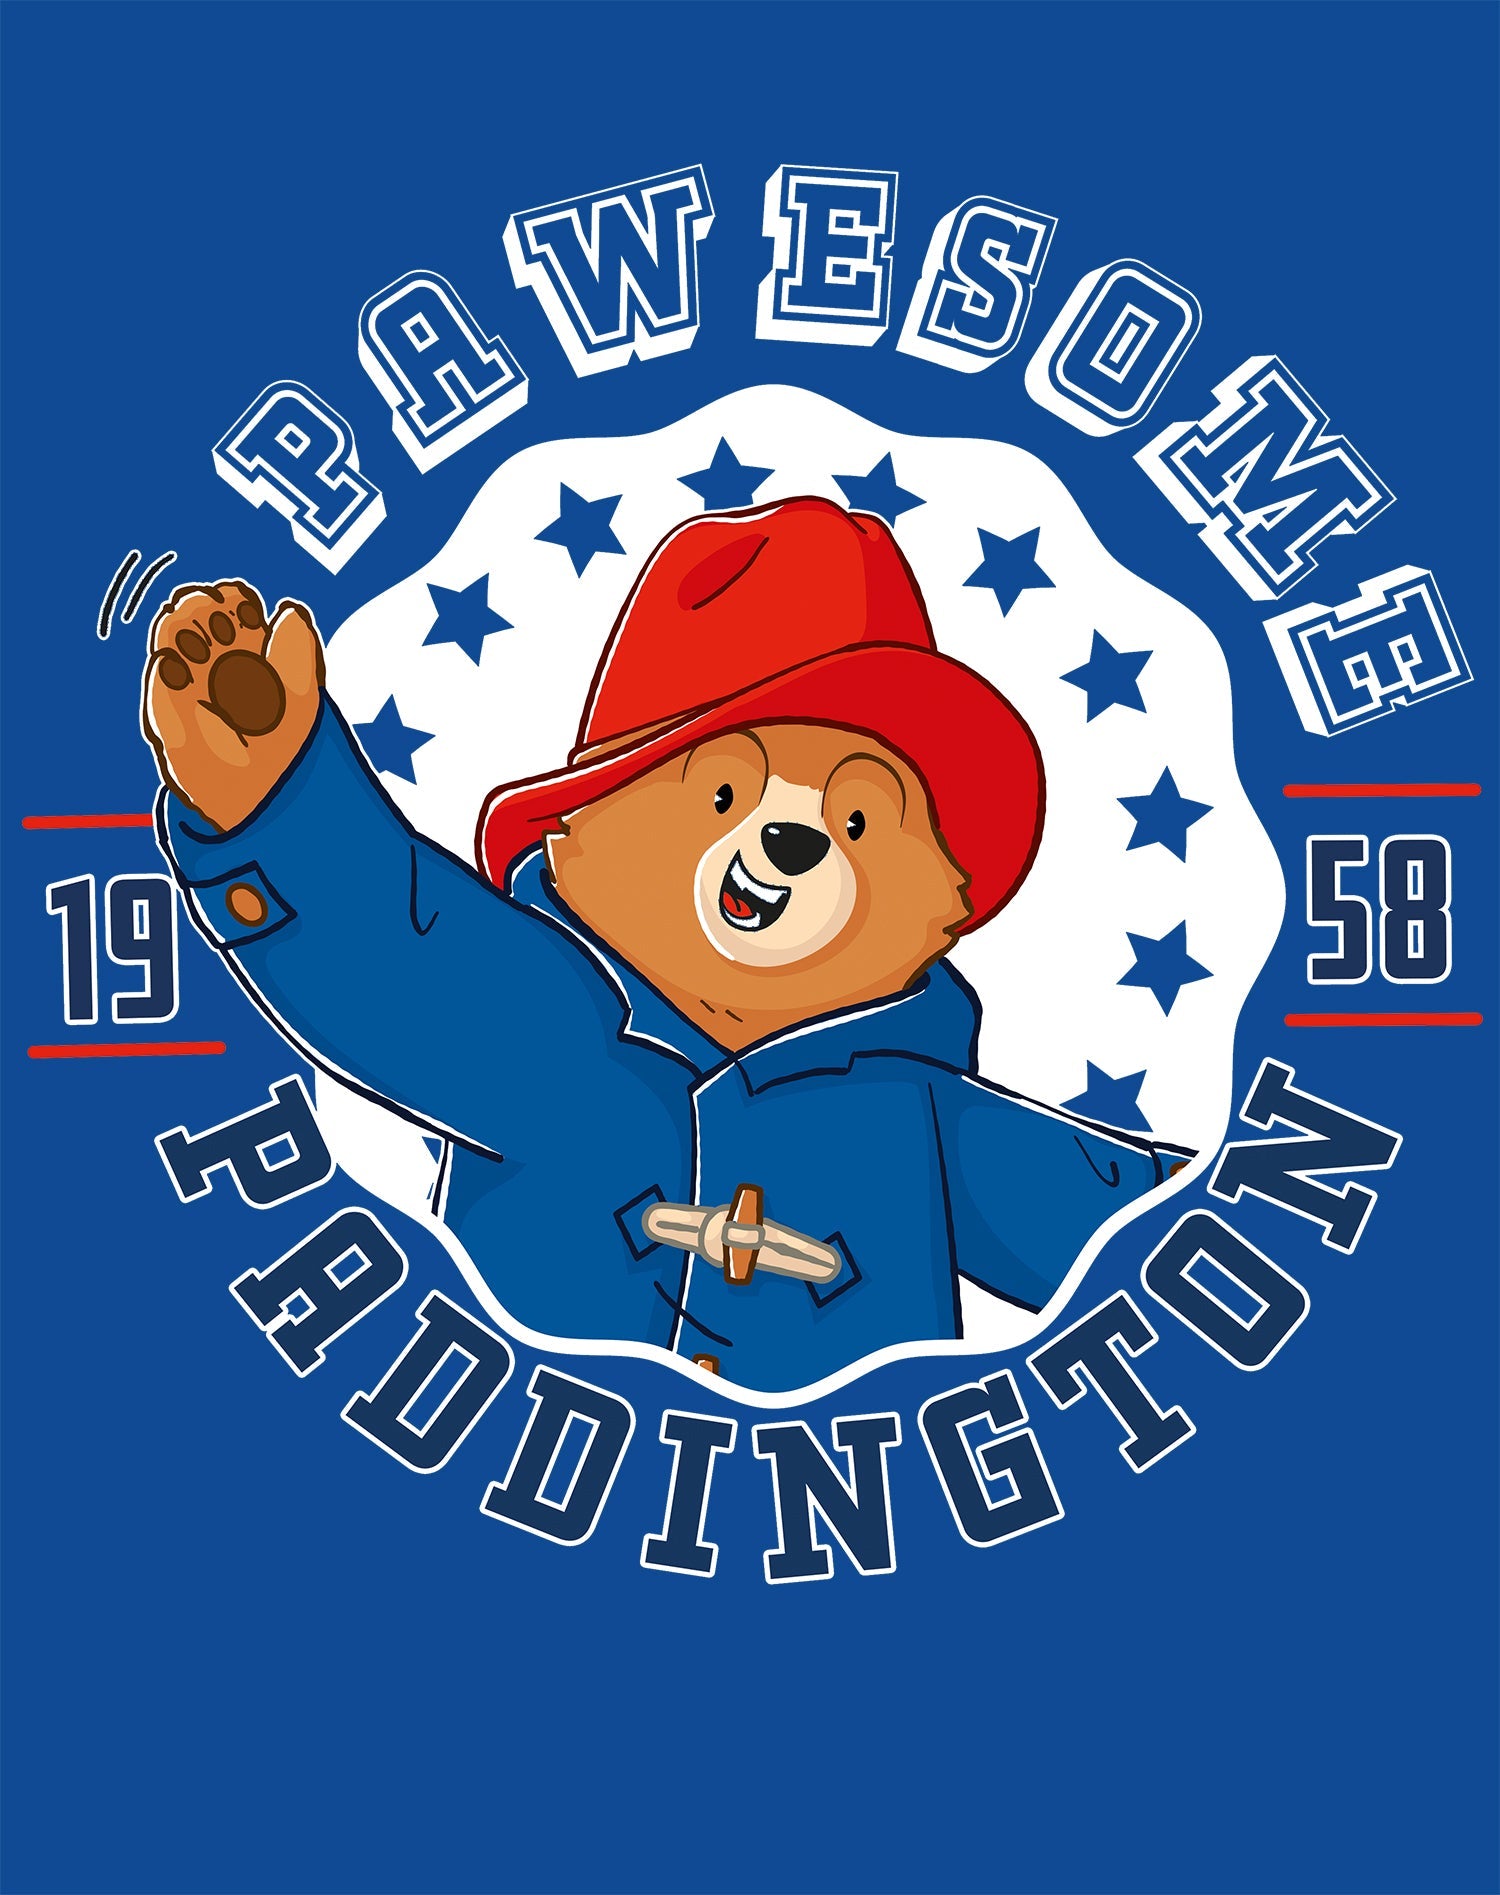 Paddington Bear Collegiate Varsity Pawesome School Official Youth T-Shirt